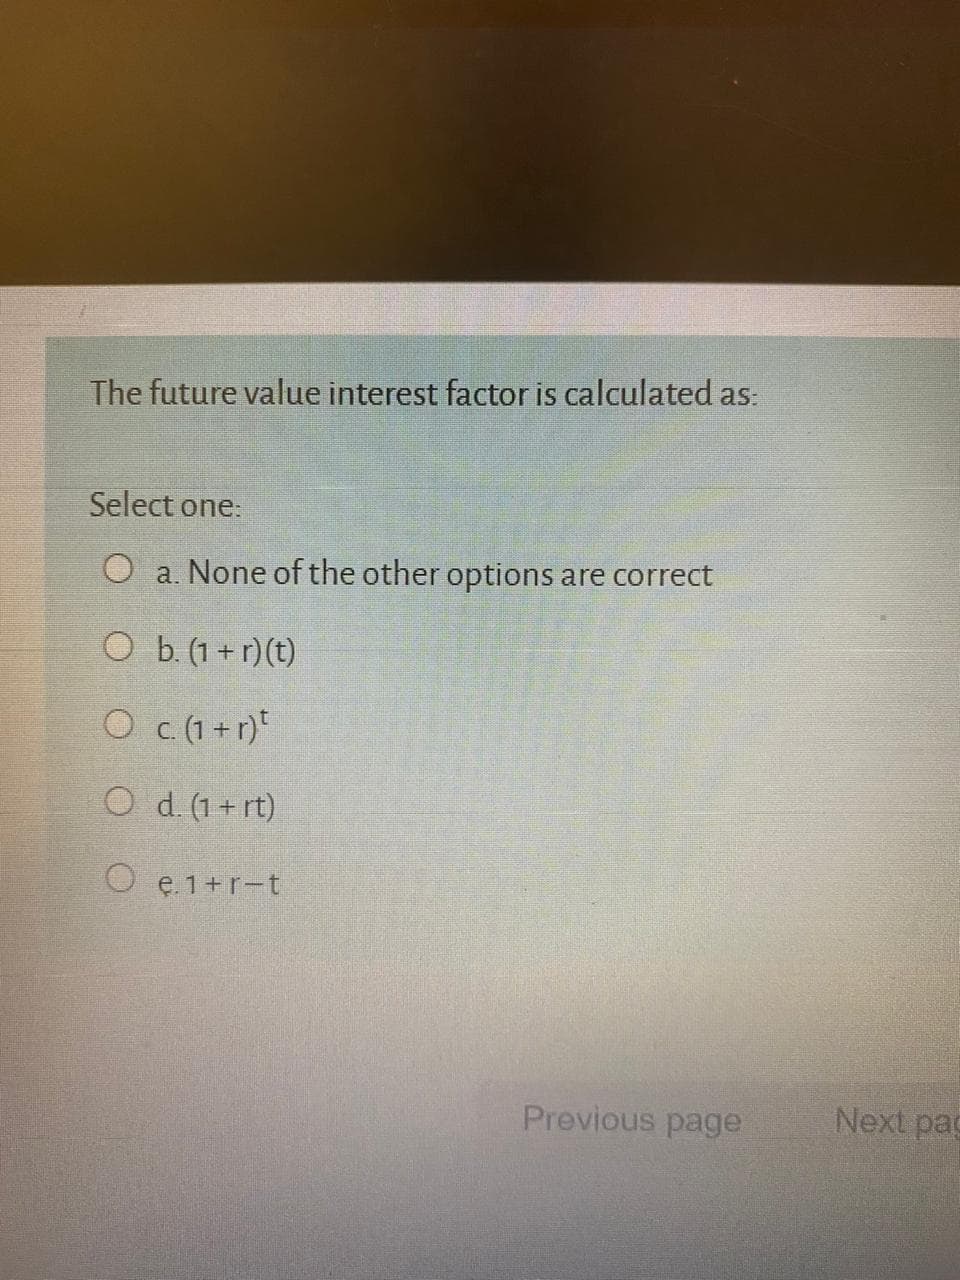 The future value interest factor is calculated as:
Select one:
O a. None of the other options are correct
O b. (1 + r)(t)
